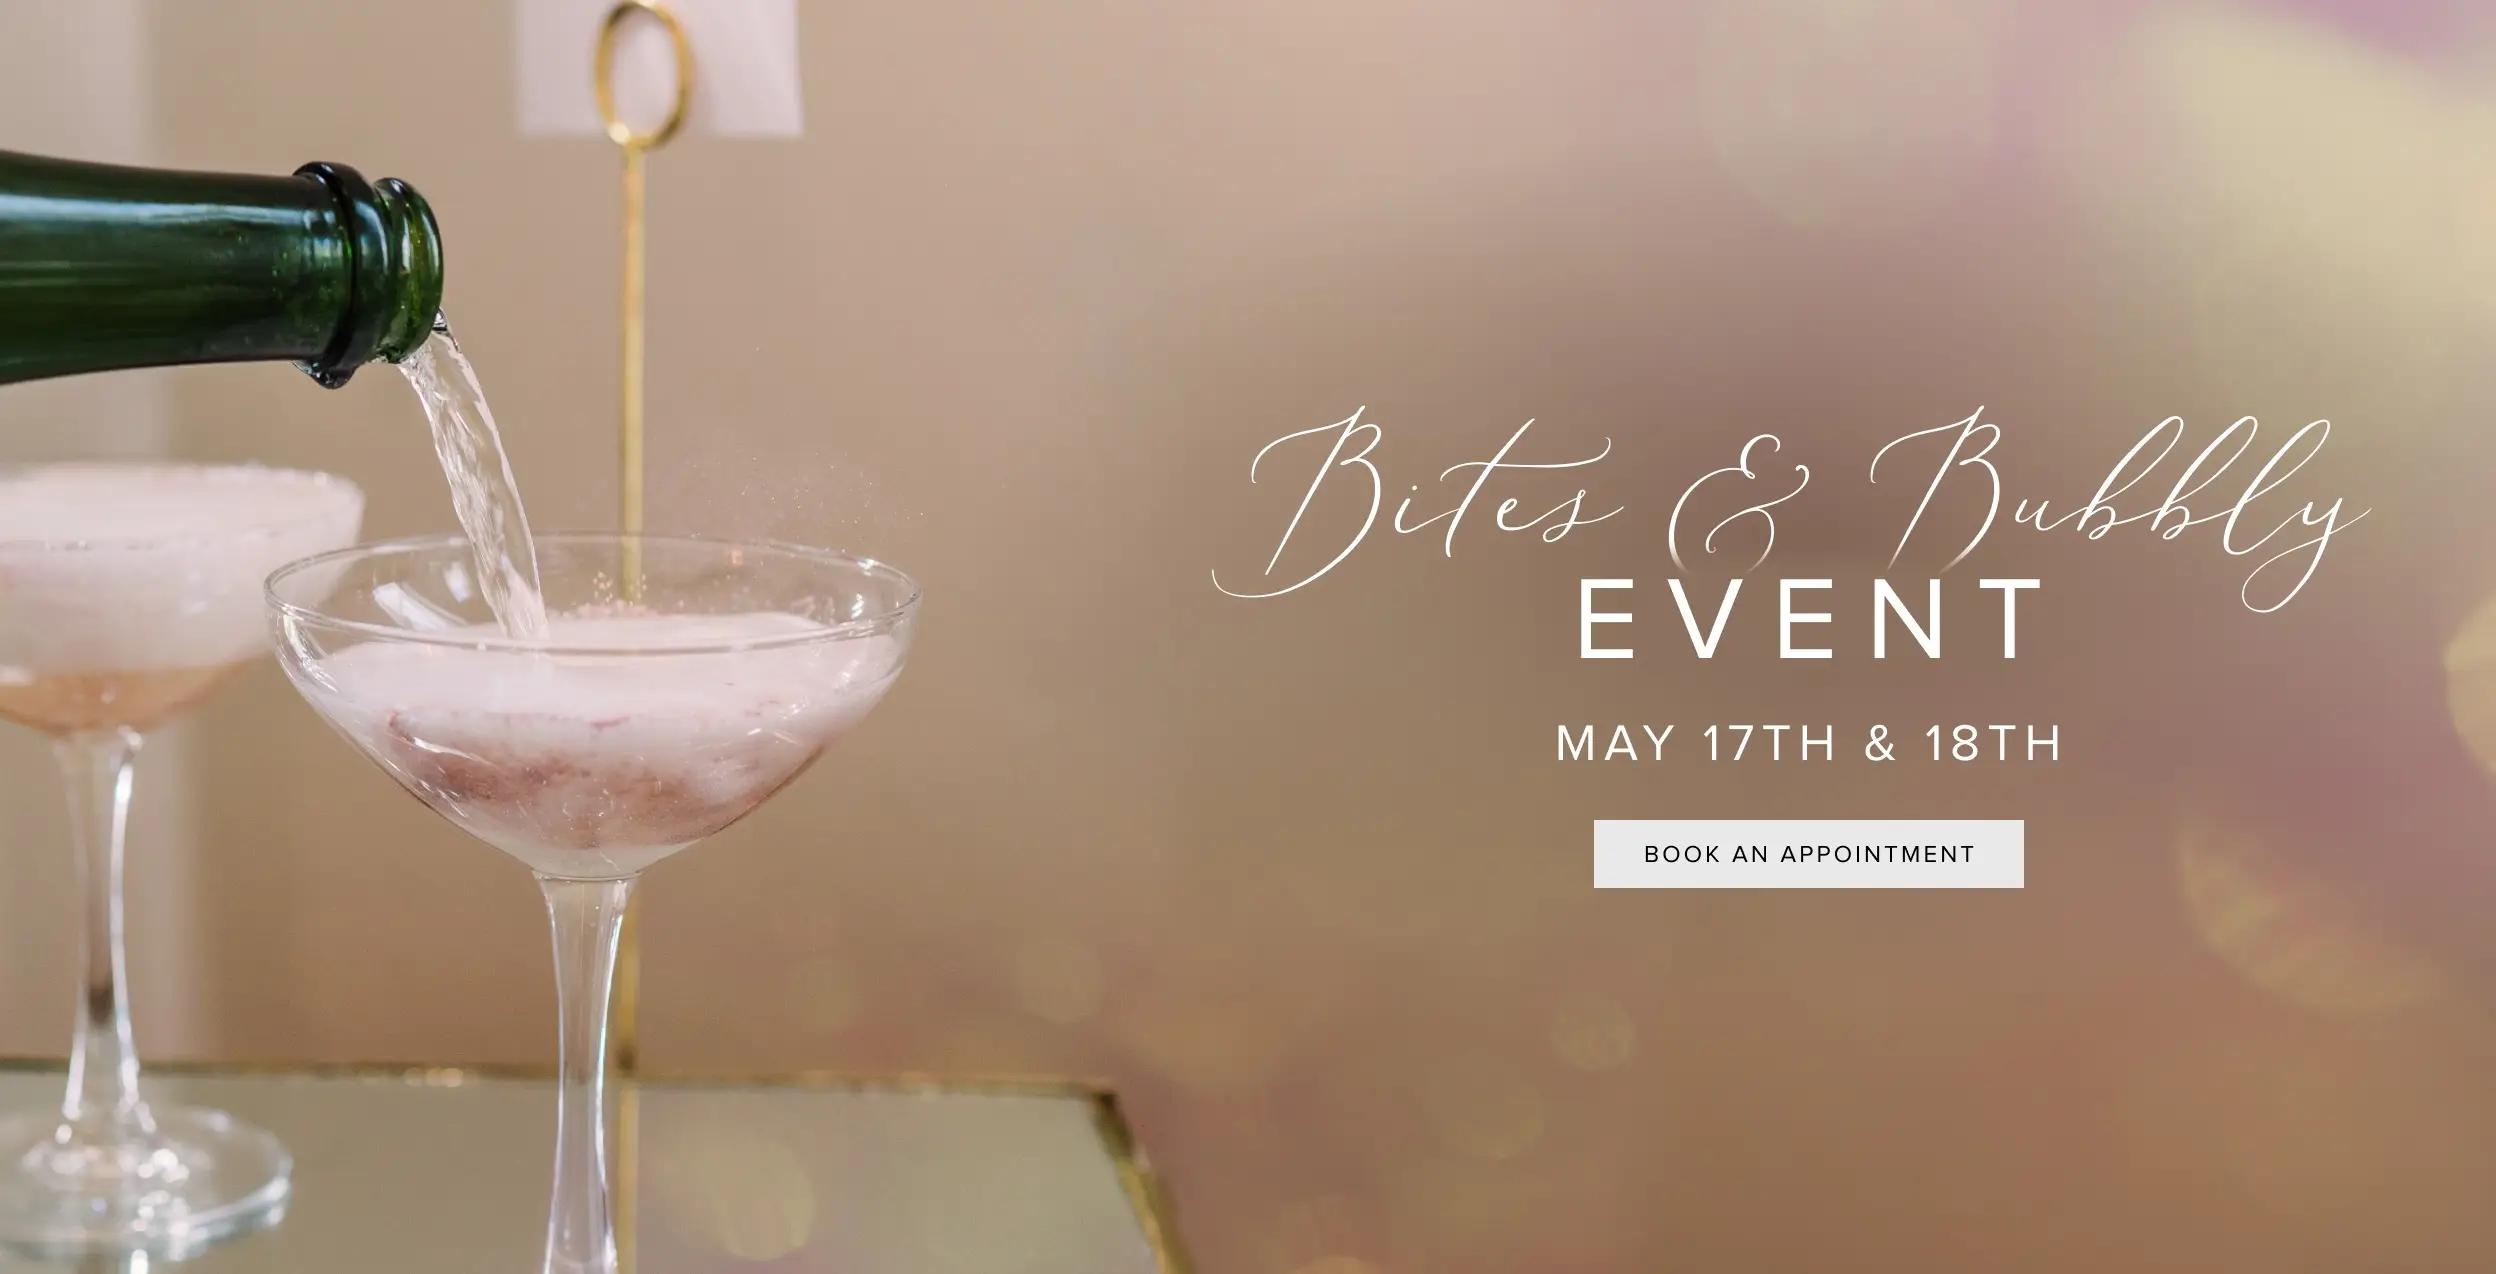 Bites & Bubbly Weekend event